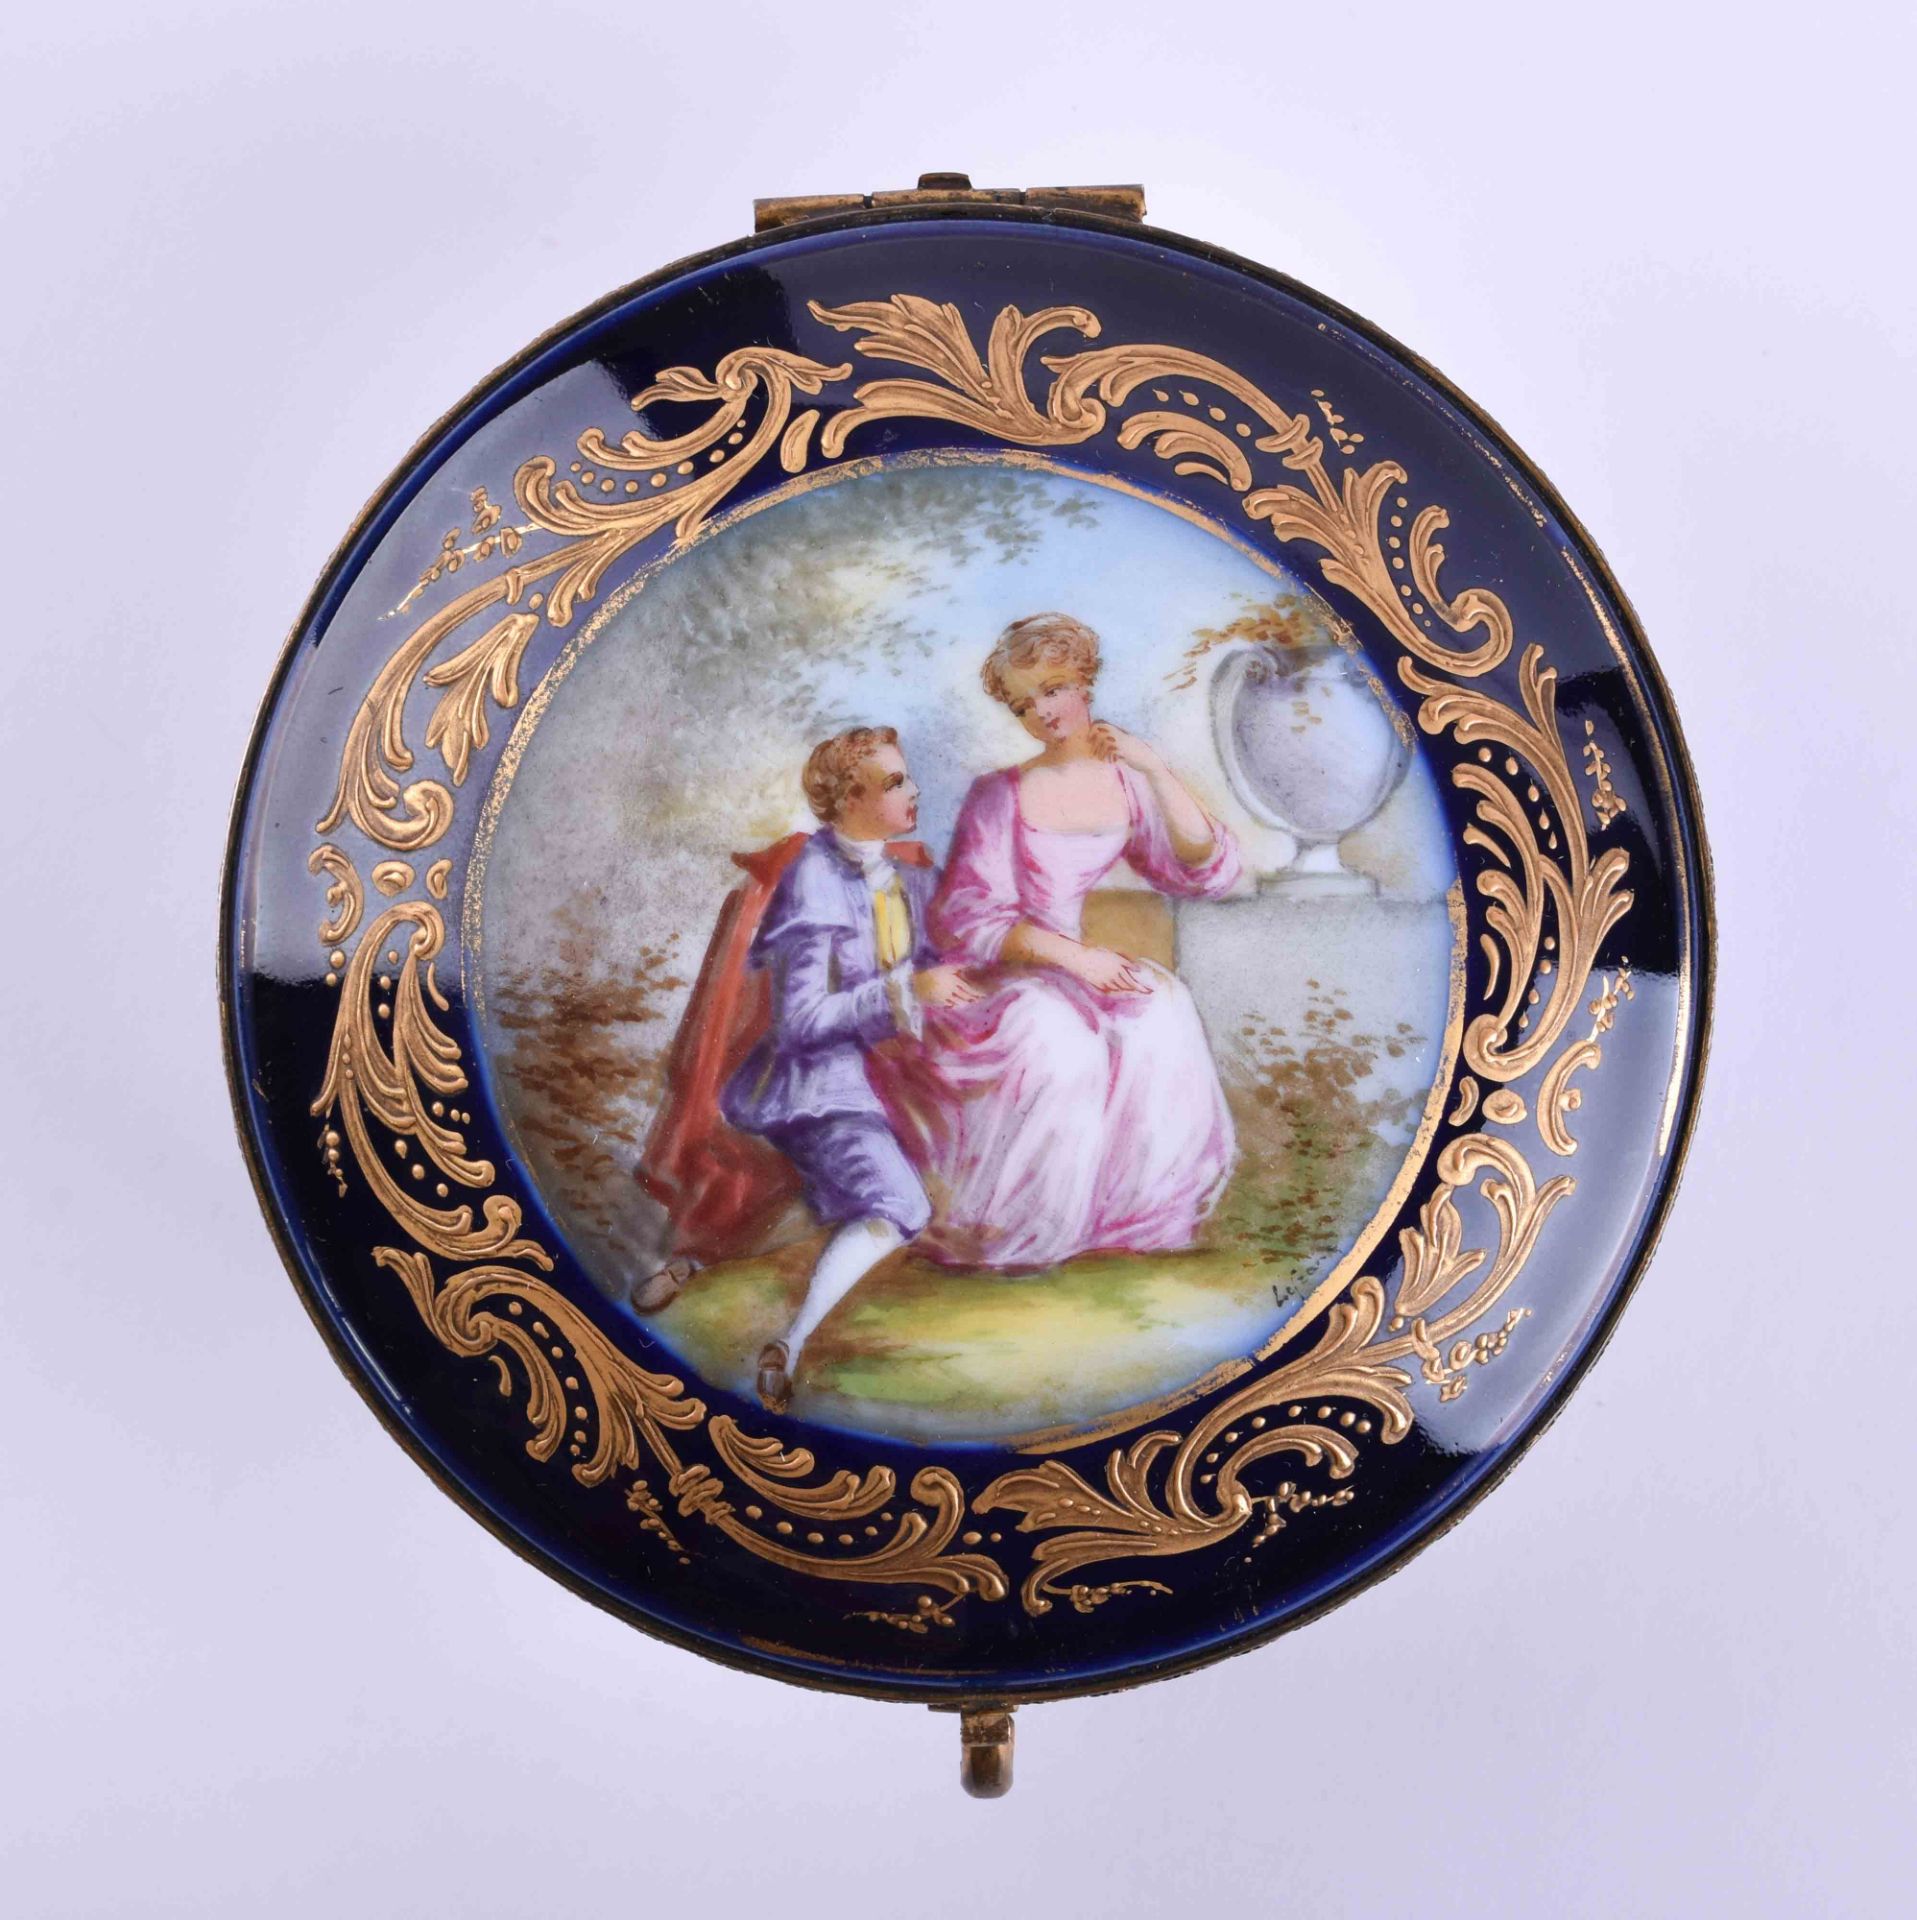  Porcelain cover box Sevres - Image 2 of 7